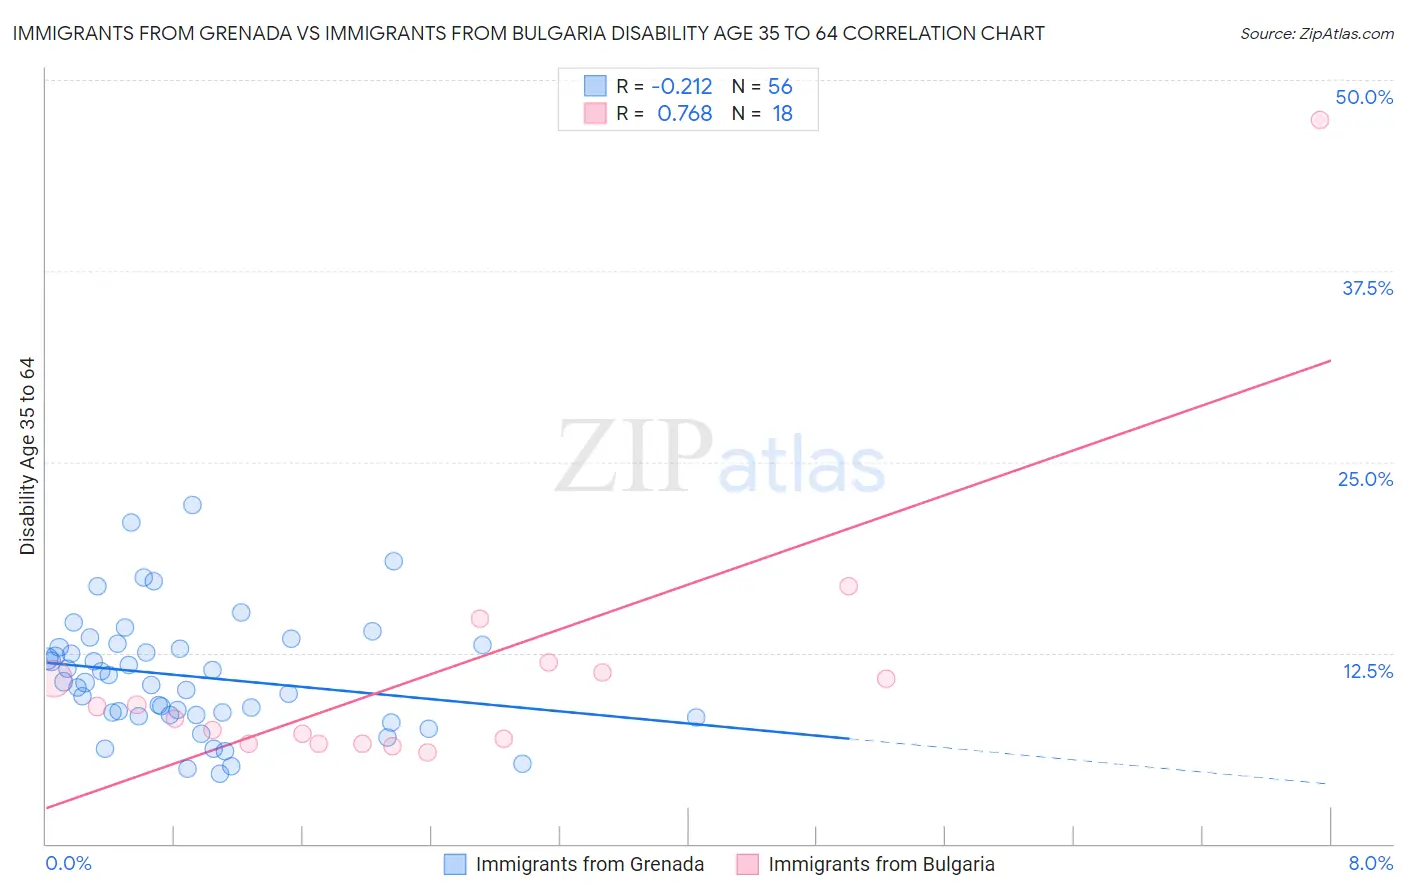 Immigrants from Grenada vs Immigrants from Bulgaria Disability Age 35 to 64